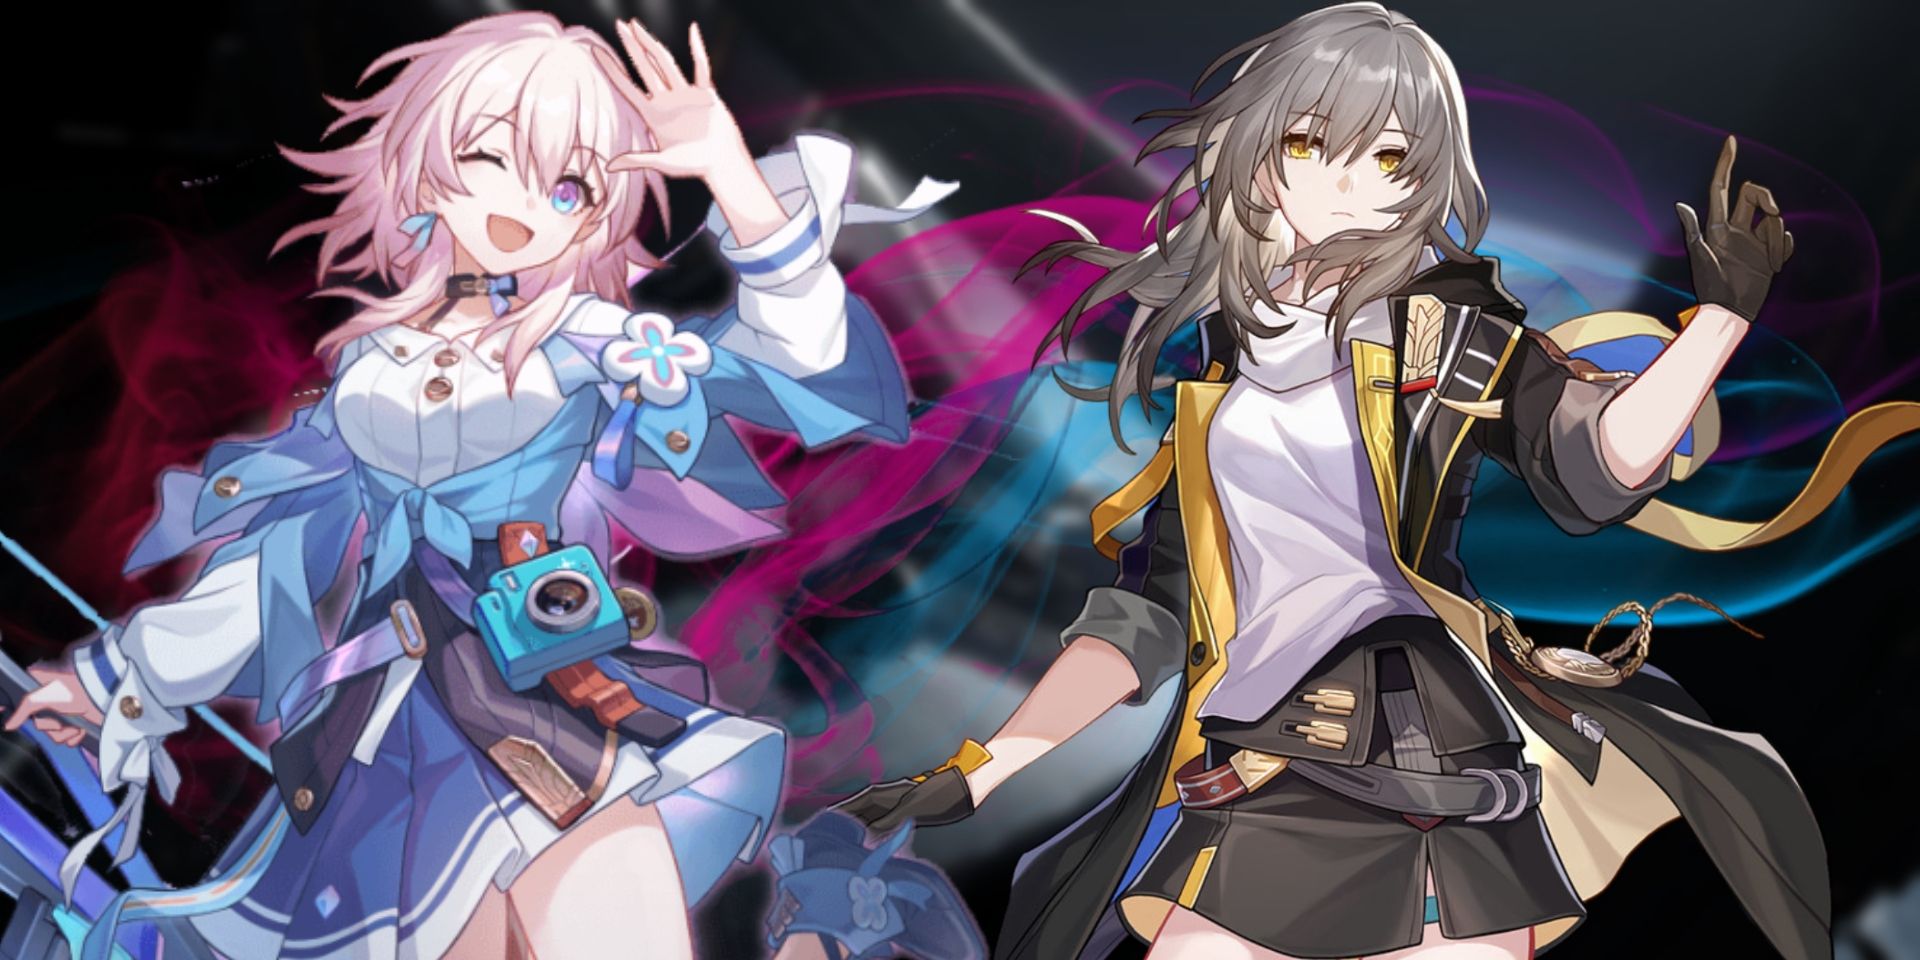 Honkai Star Rail: Top 4 Four-Star Characters You Should Pull And Build